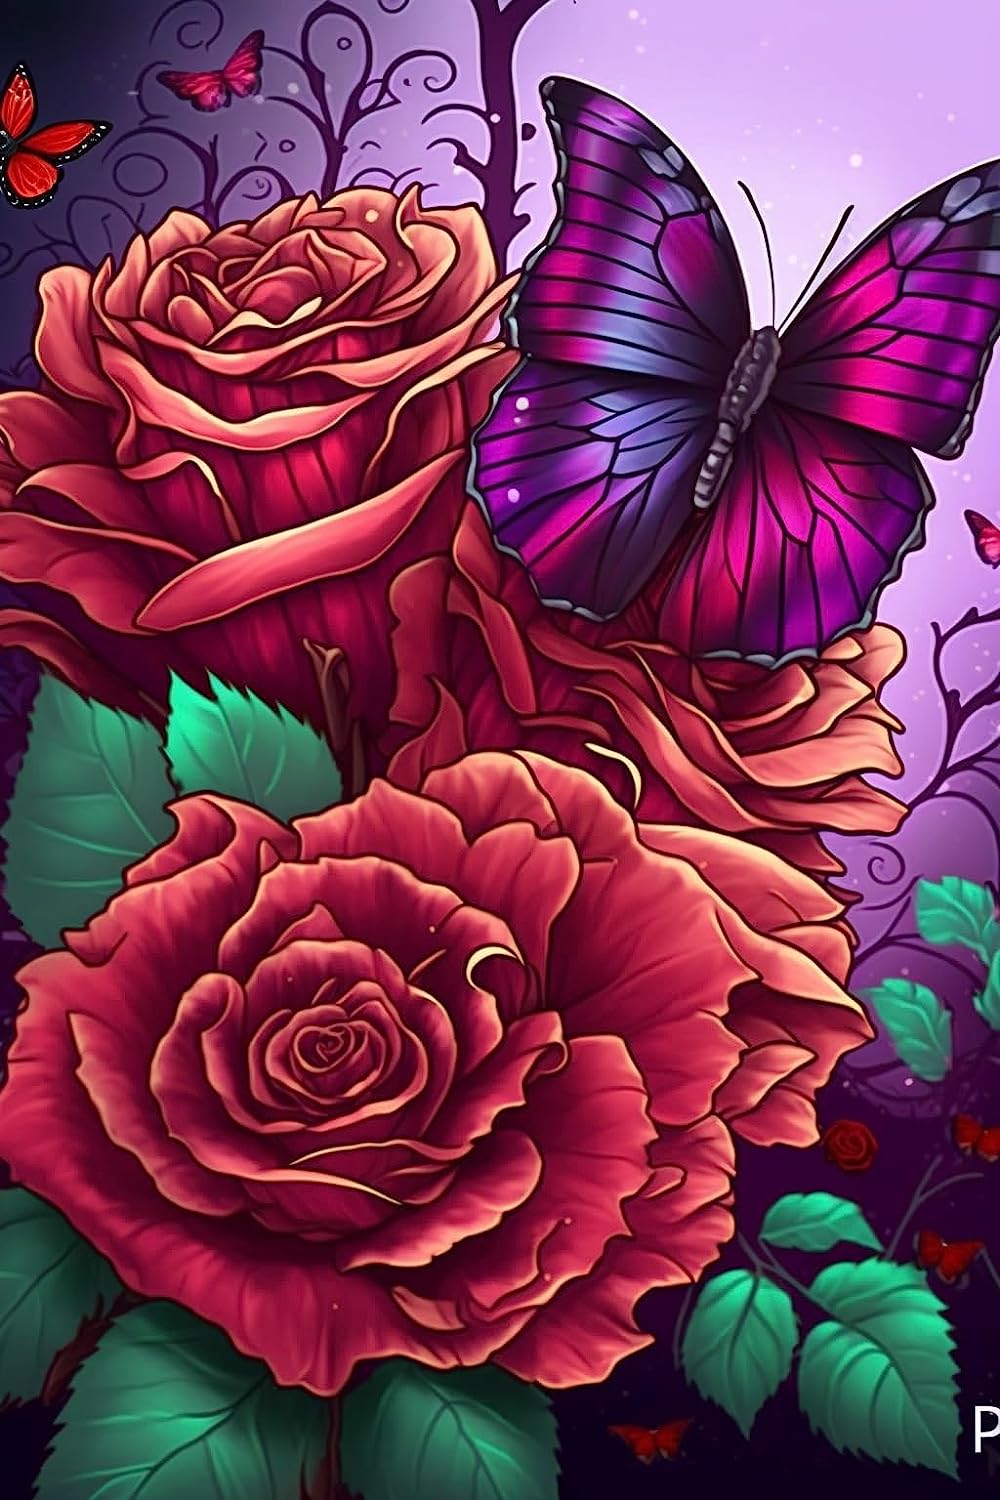 Wooden Jigsaw Puzzle Red Roses and Purple Butterflies Challenging Educational Fun Family Games Toys Gifts for Home Decor Family Activities 500 Pieces